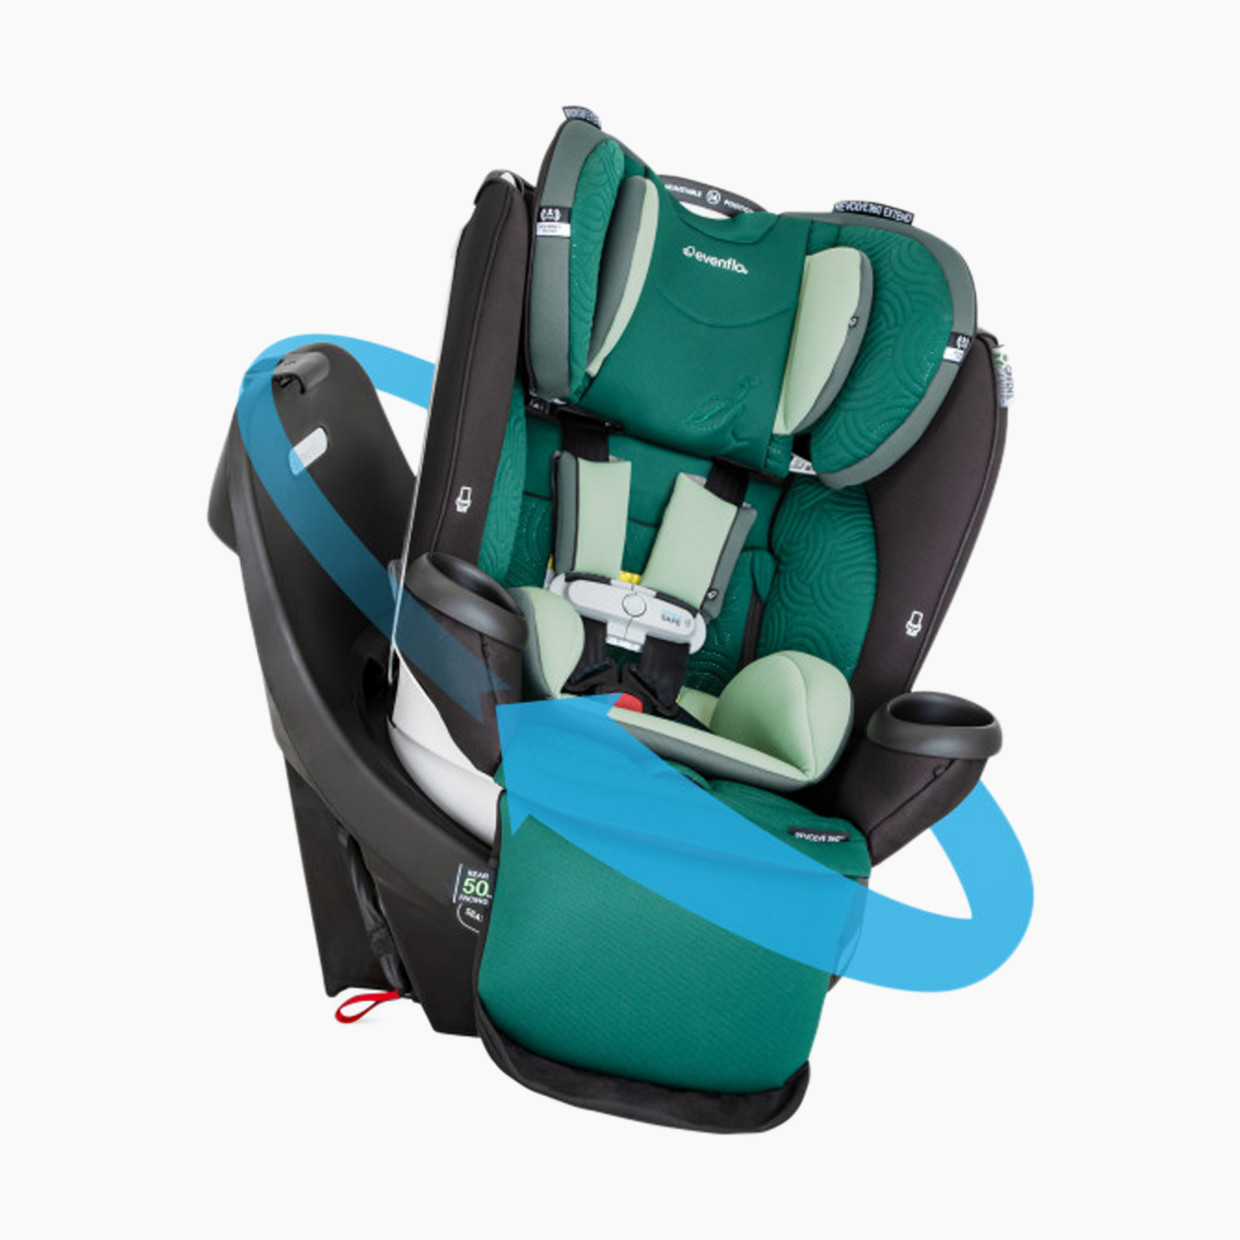 Evenflo Gold Revolve360 Extend All-in-One Rotational Car Seat with Green & Gentle Fabric - Emerald Green.